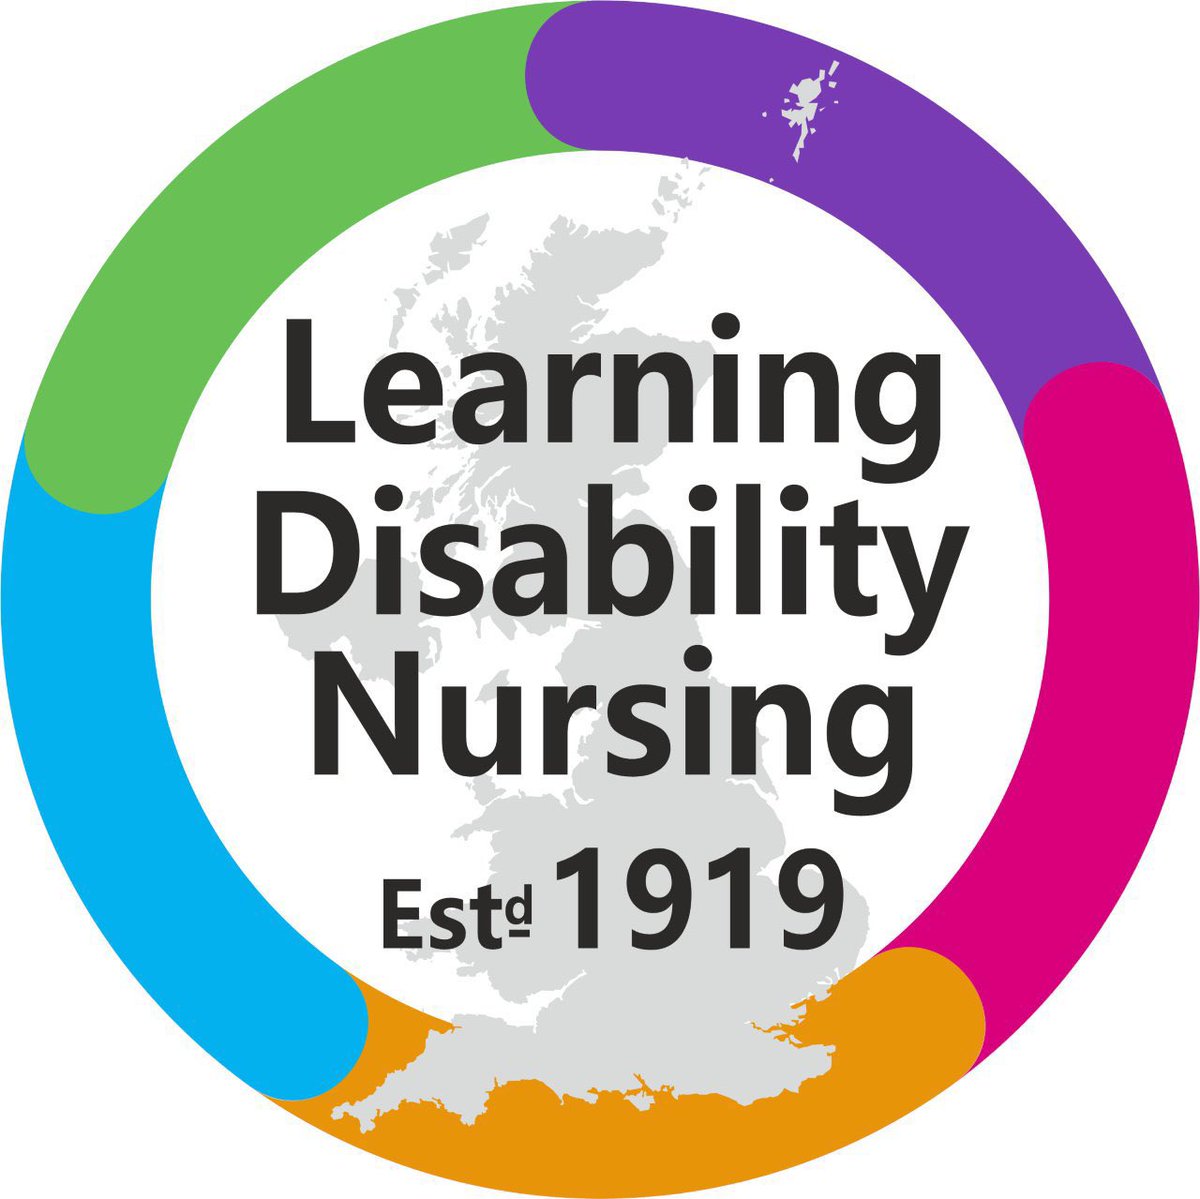 Happy National Learning Disabilities Nursing Day #ChooseLDNursing! Three months qualified and loving every second #LDNursingday22